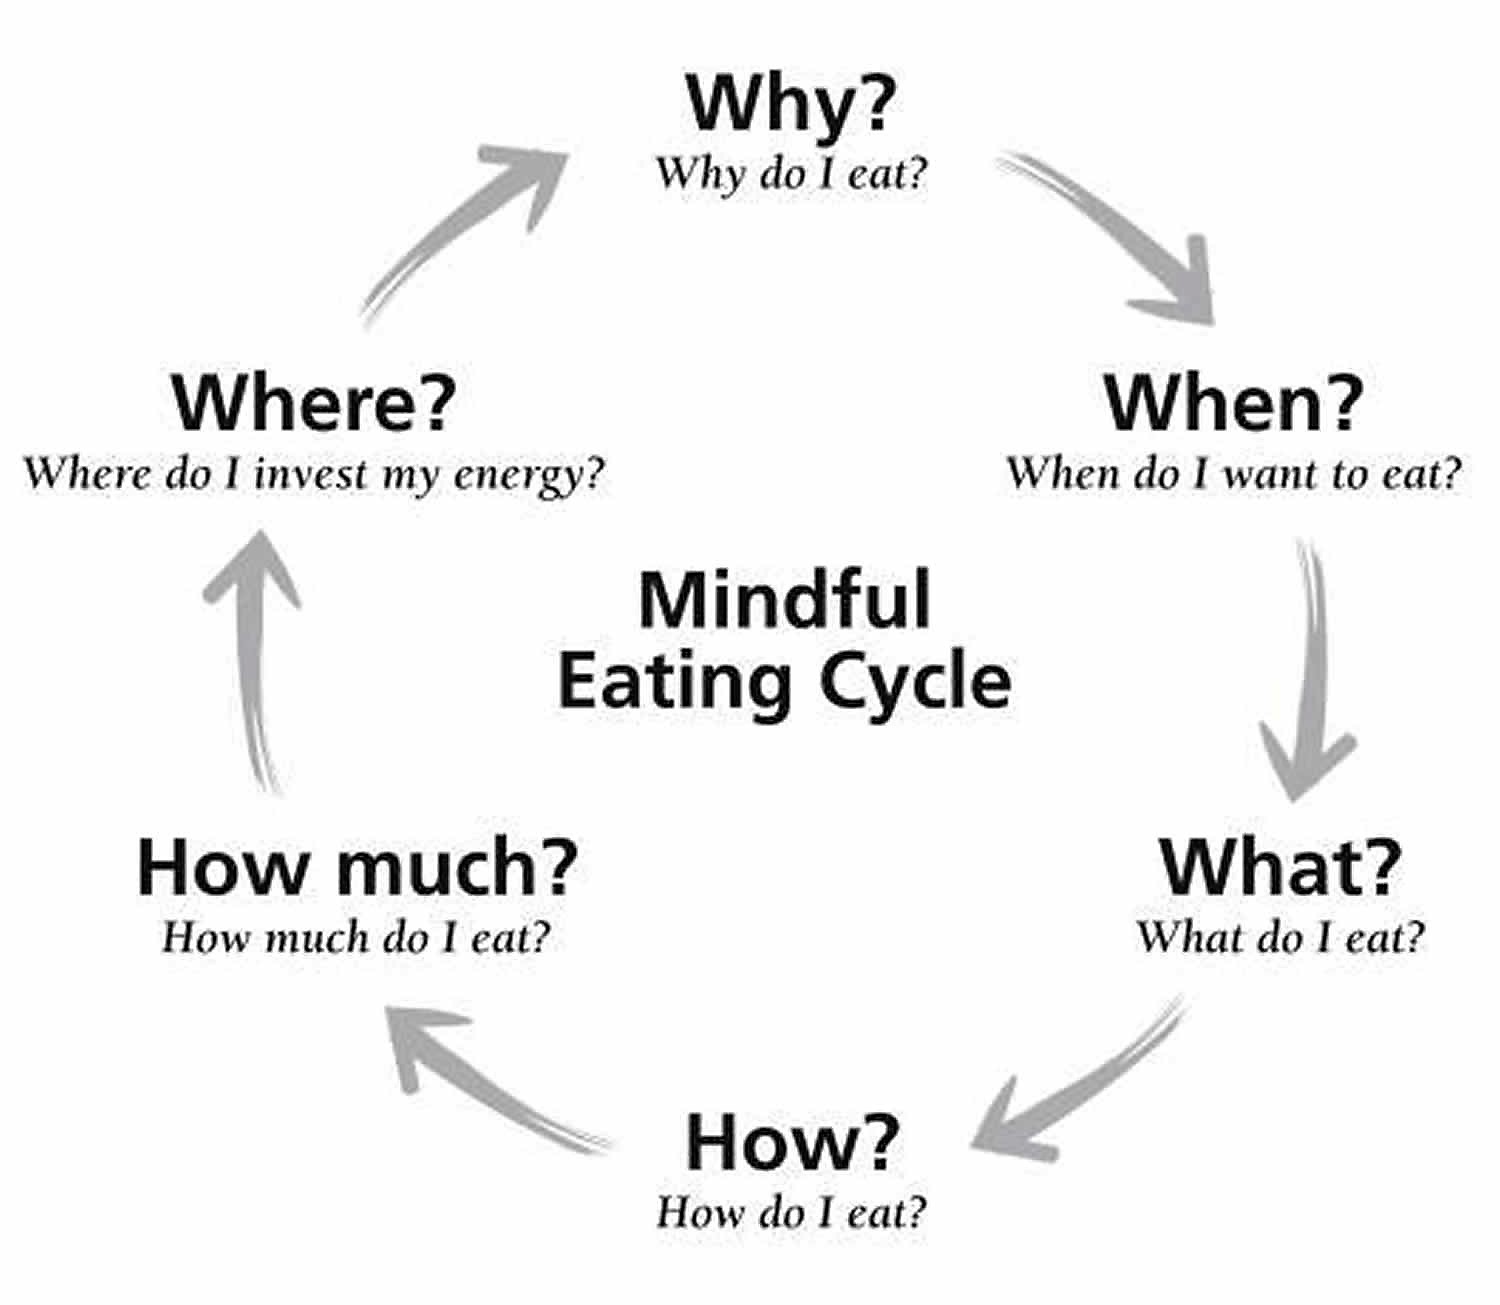 Why do you late. Mindful eating. Healthy eating Mindful. When where how. Emotional eating Cycle.